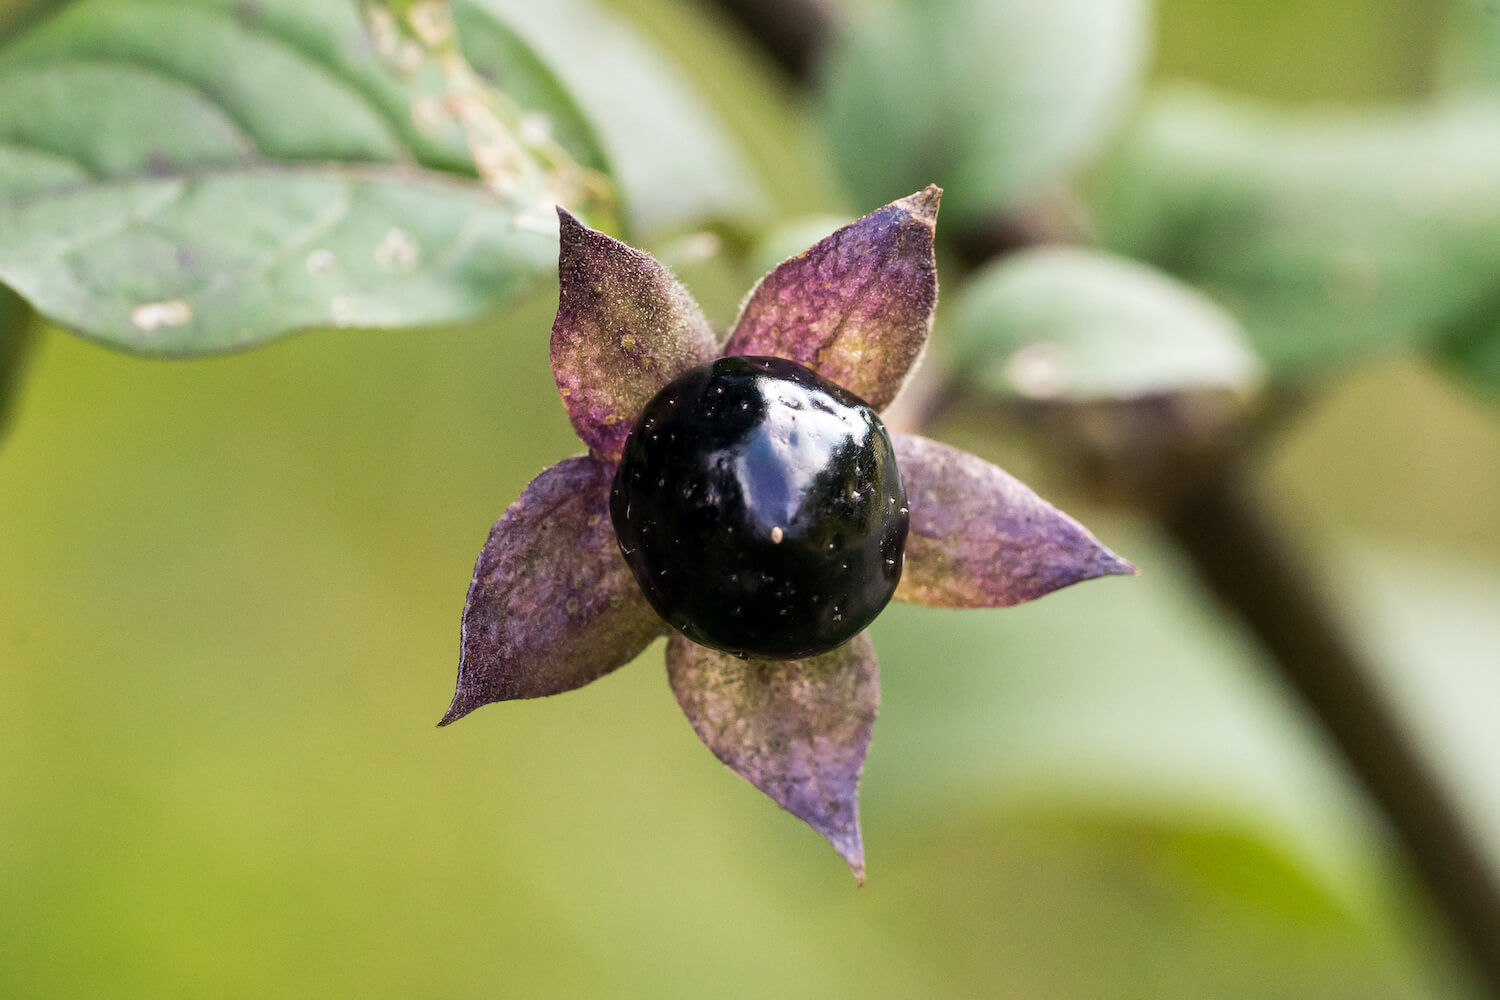 Deadly nightshade: everything about the plant - Plantura